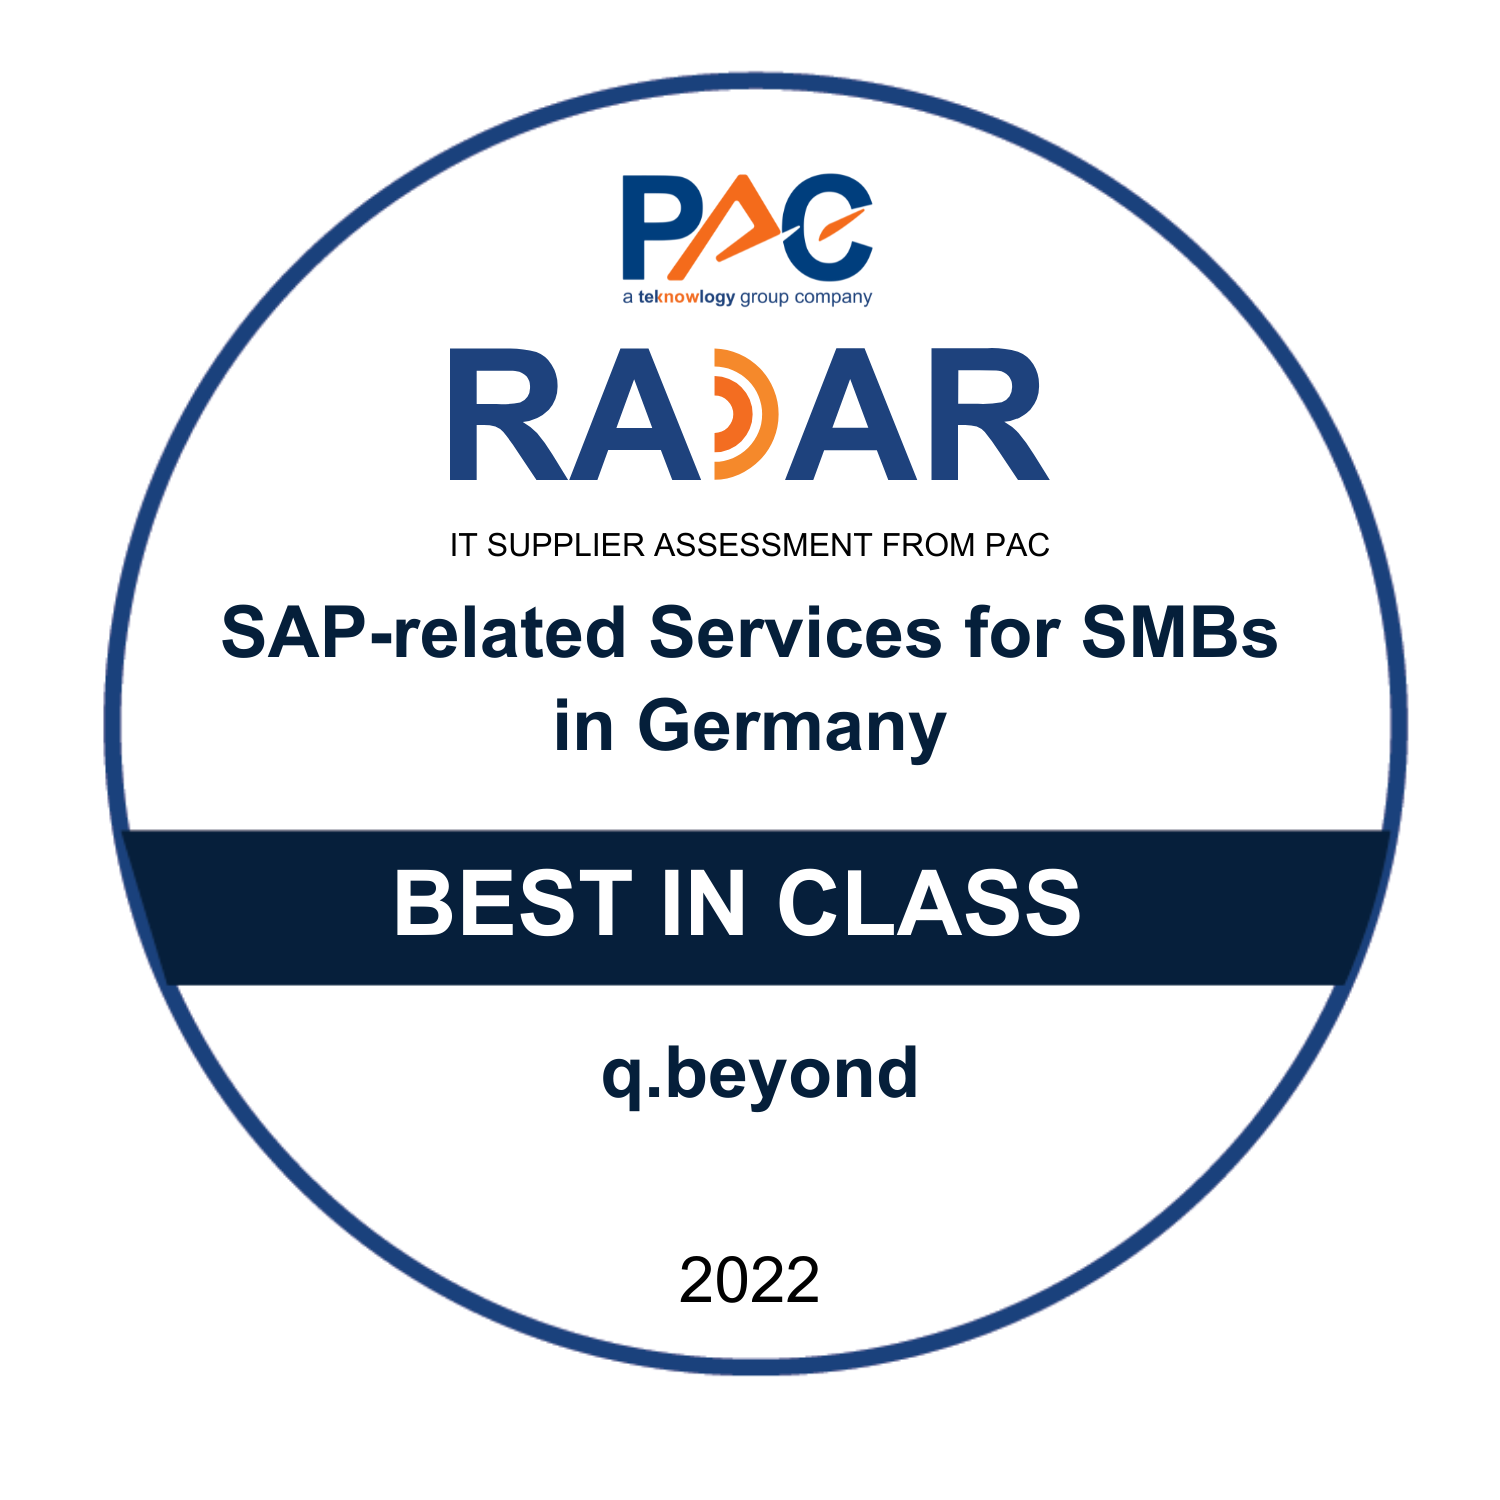 SAP-related Services for SMBs in Germany 2022 - Best in class